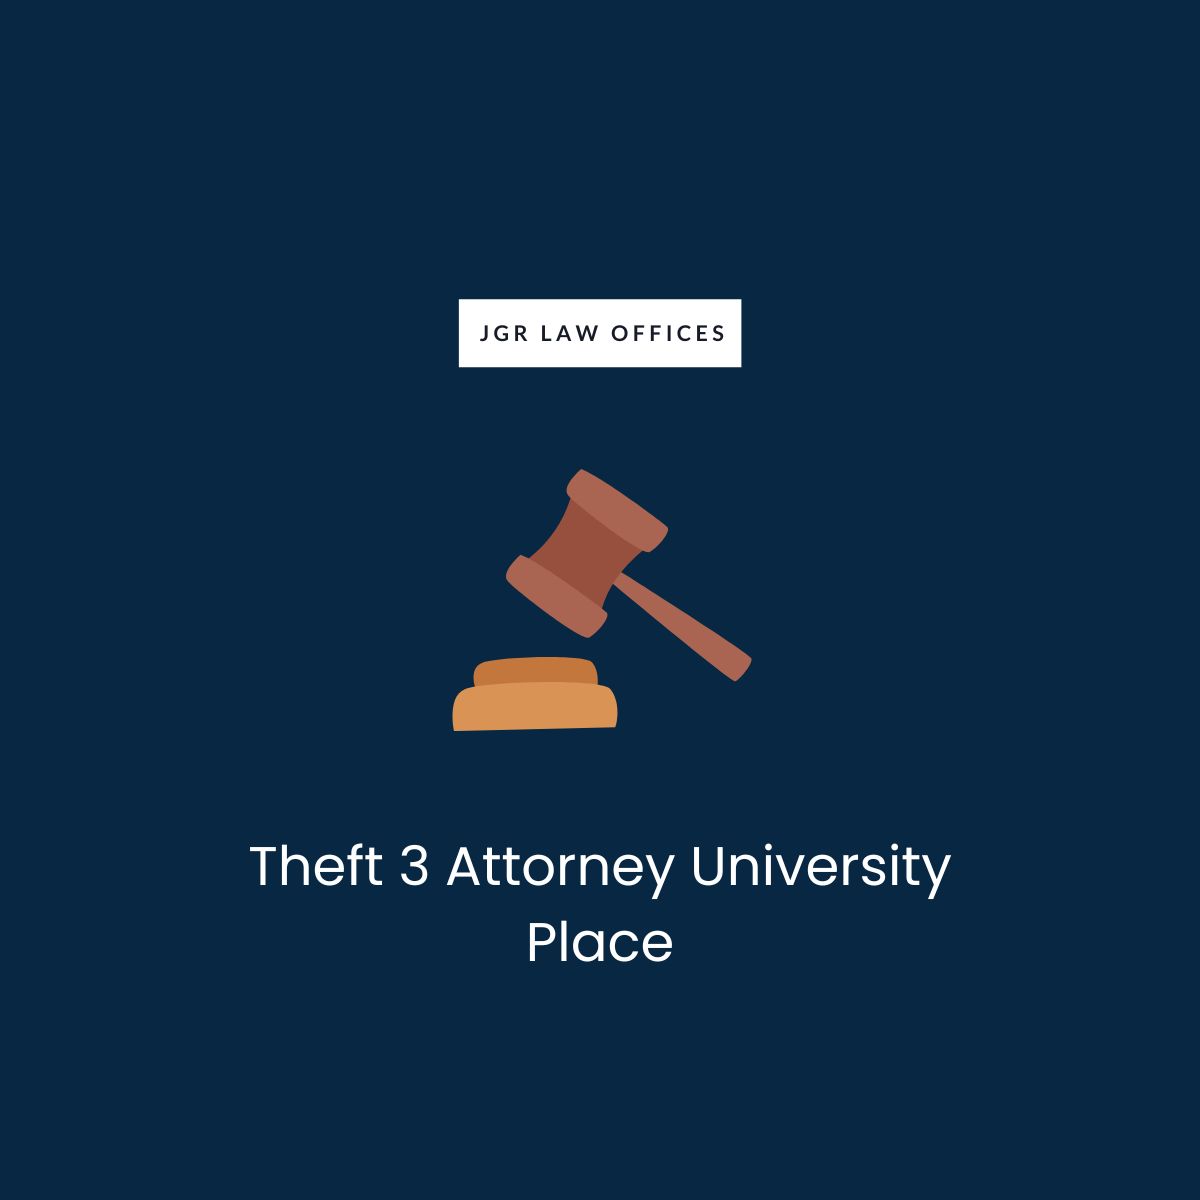 Theft 3 Lawyer University Place Theft 3 Theft 3